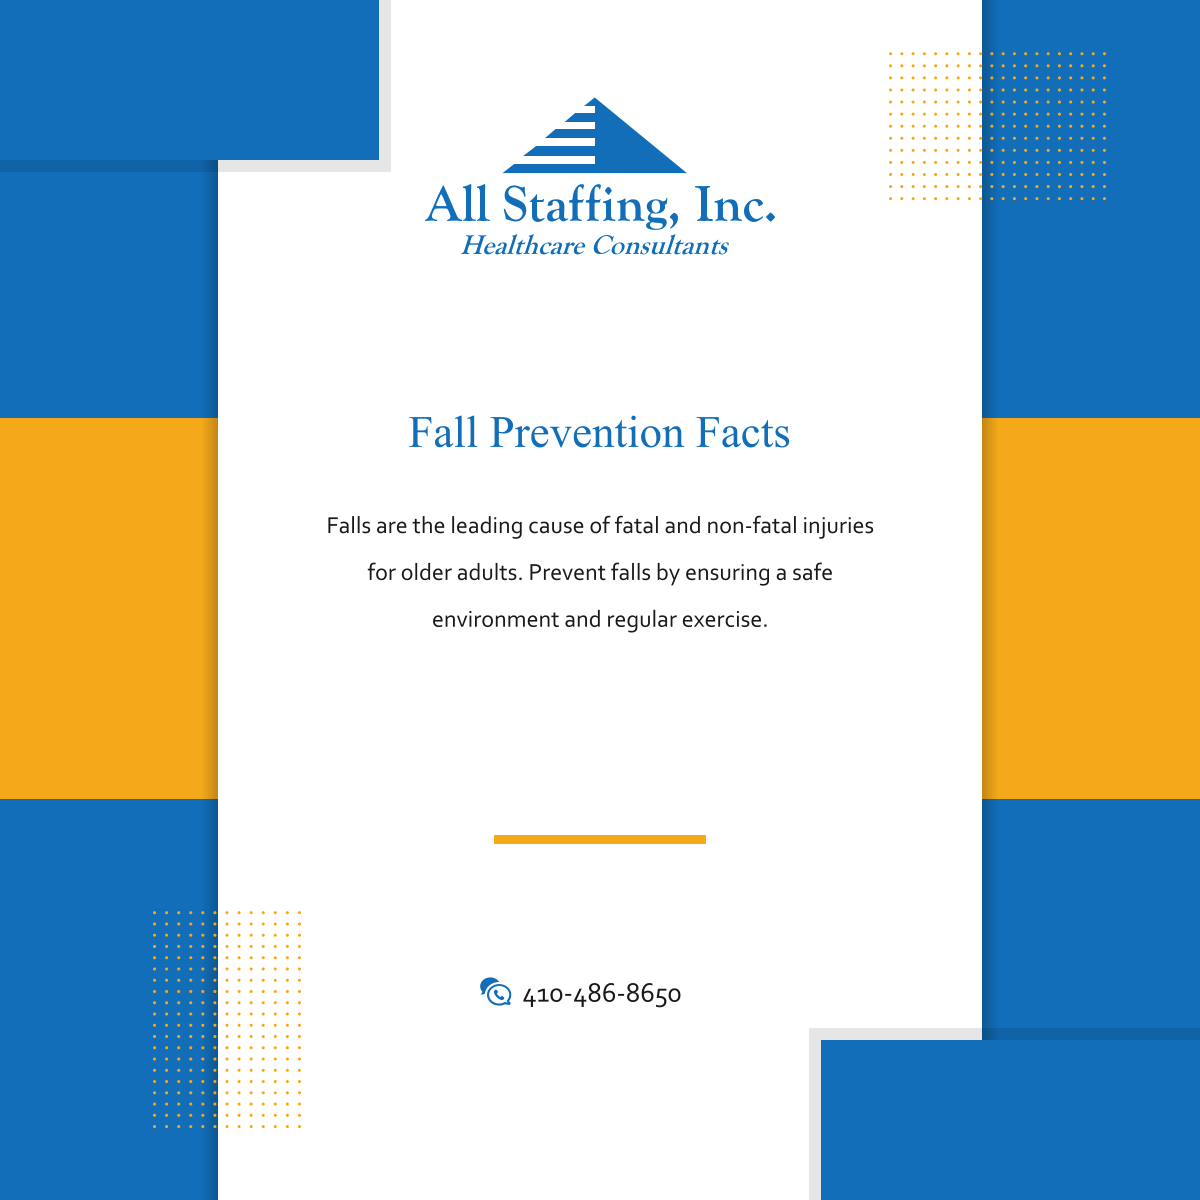 Stay safe and active! Take steps to prevent falls and maintain your independence. 

#OwingsMillsMD #HealthcareStaffingAndMedicalSupplies #FallPrevention